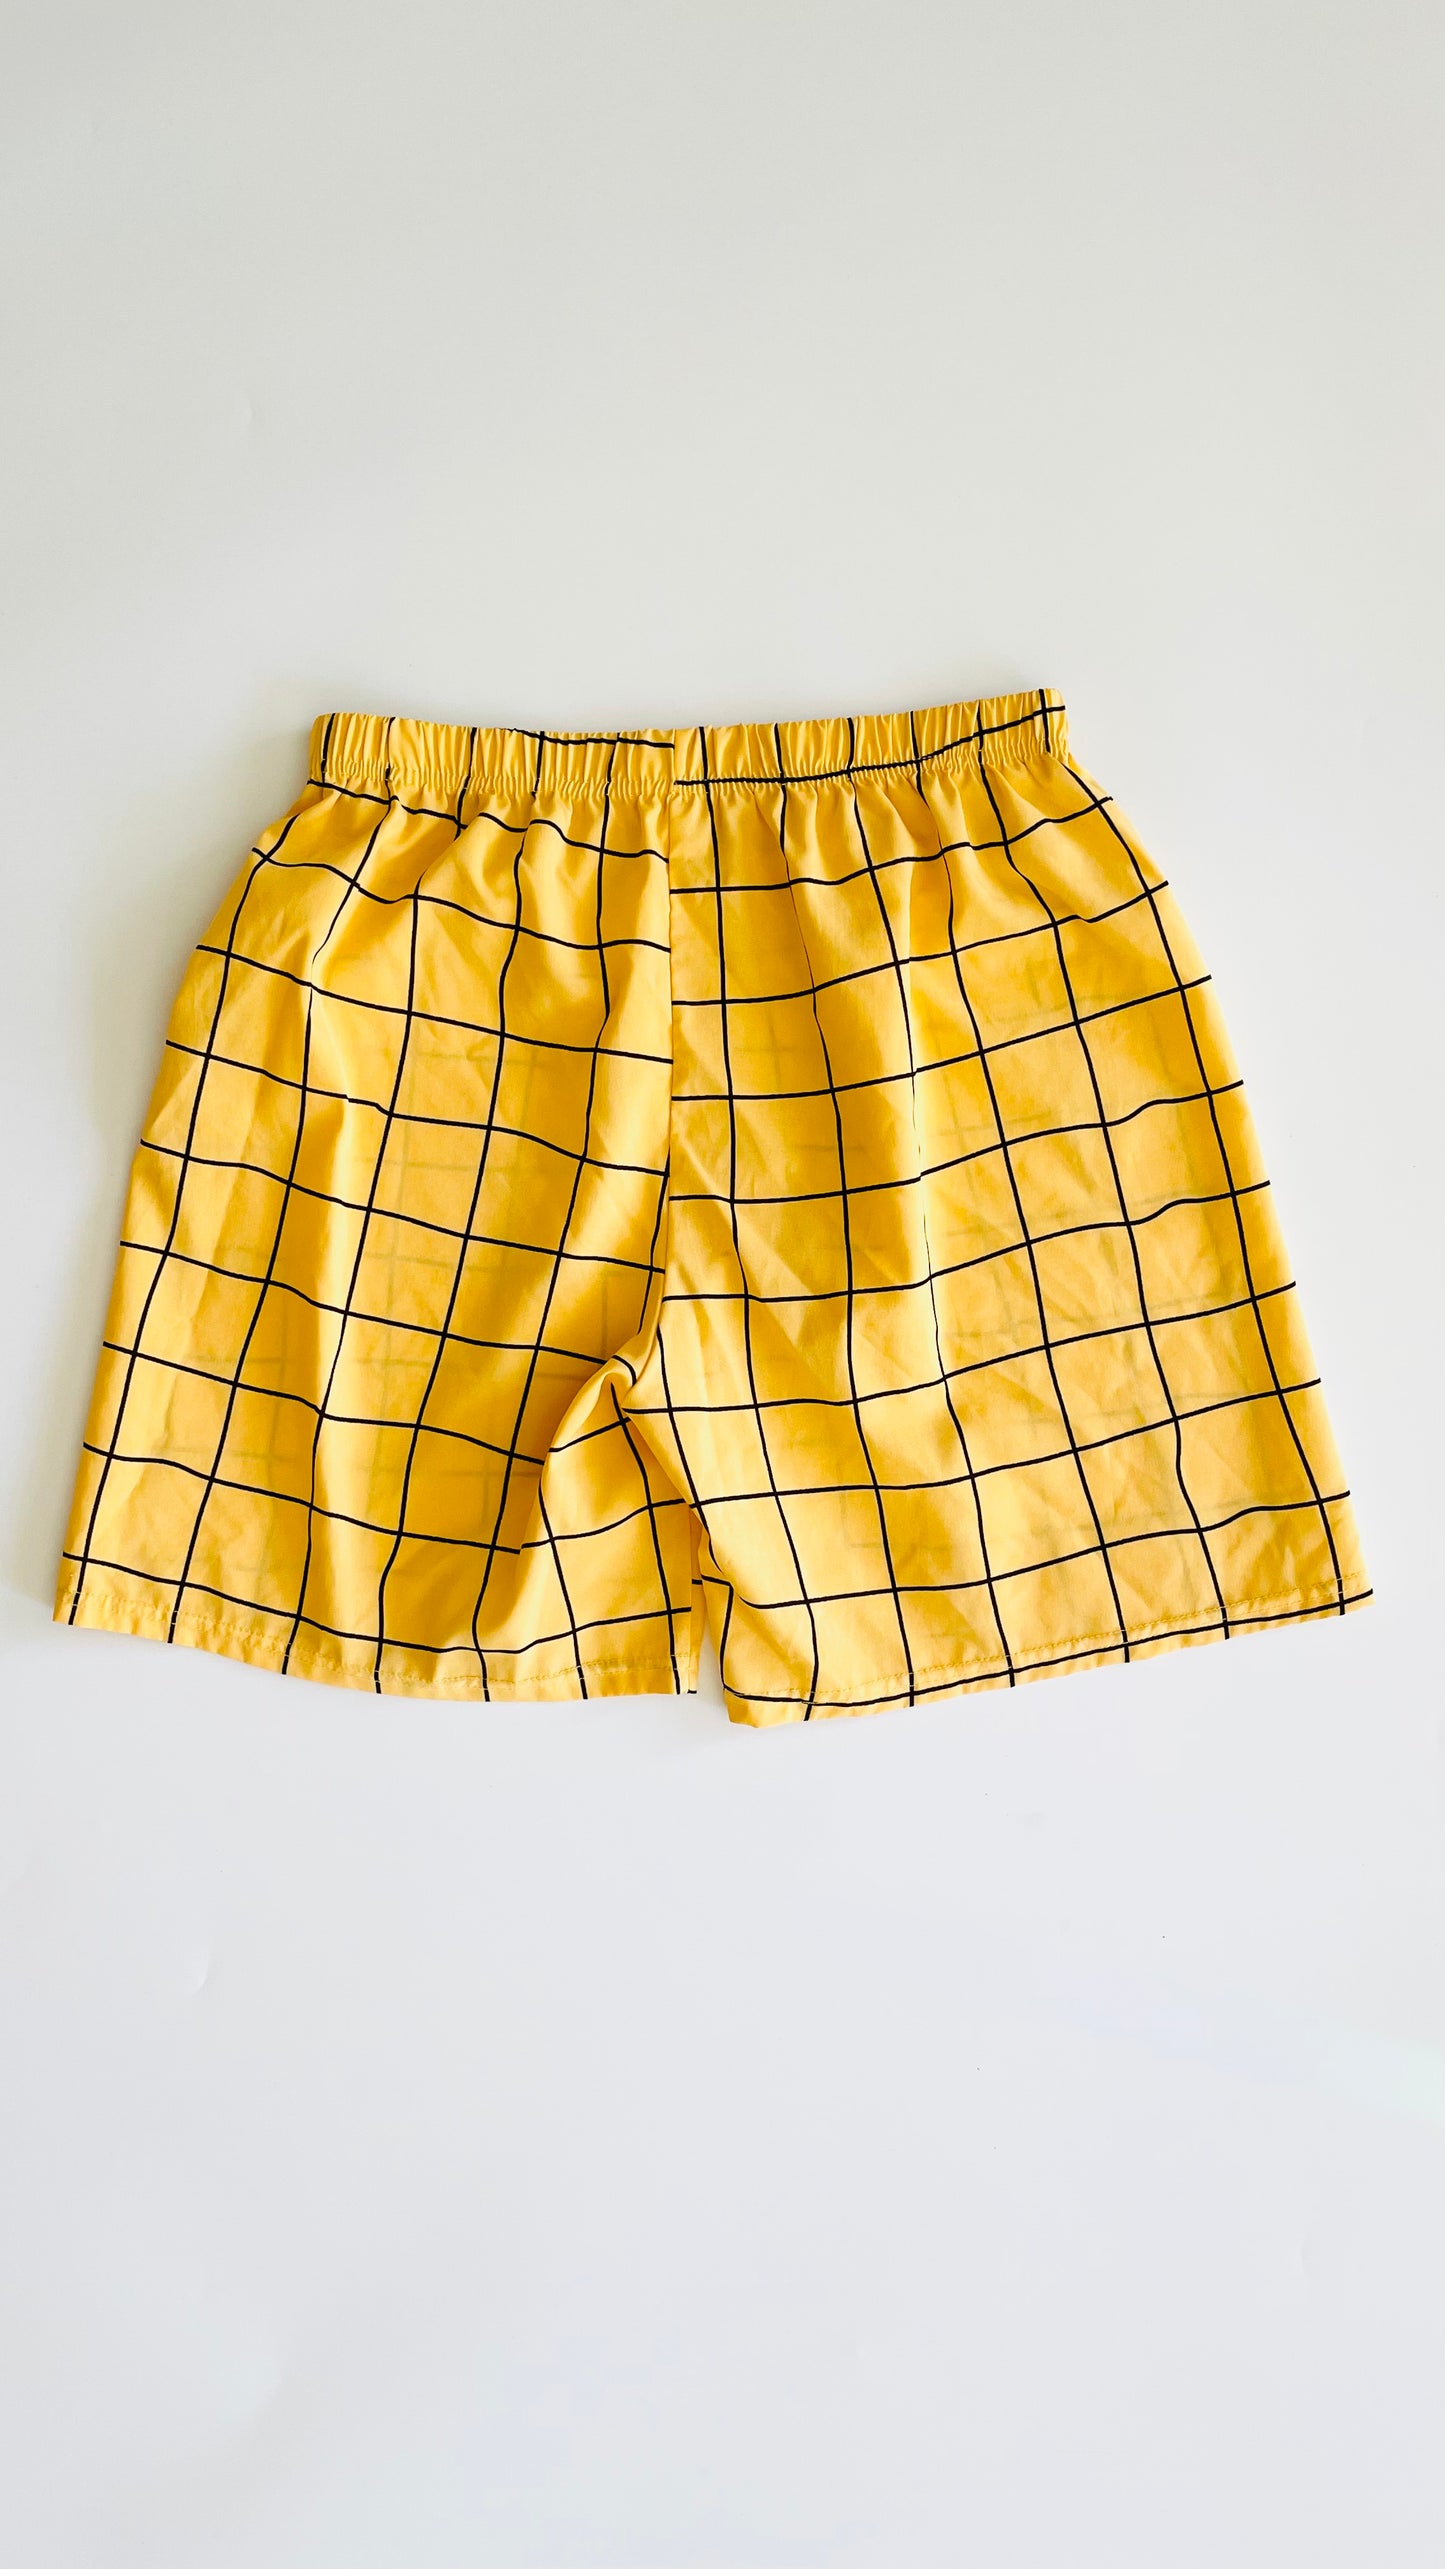 Pre-Loved yellow and black geometric plaid shorts - Size S